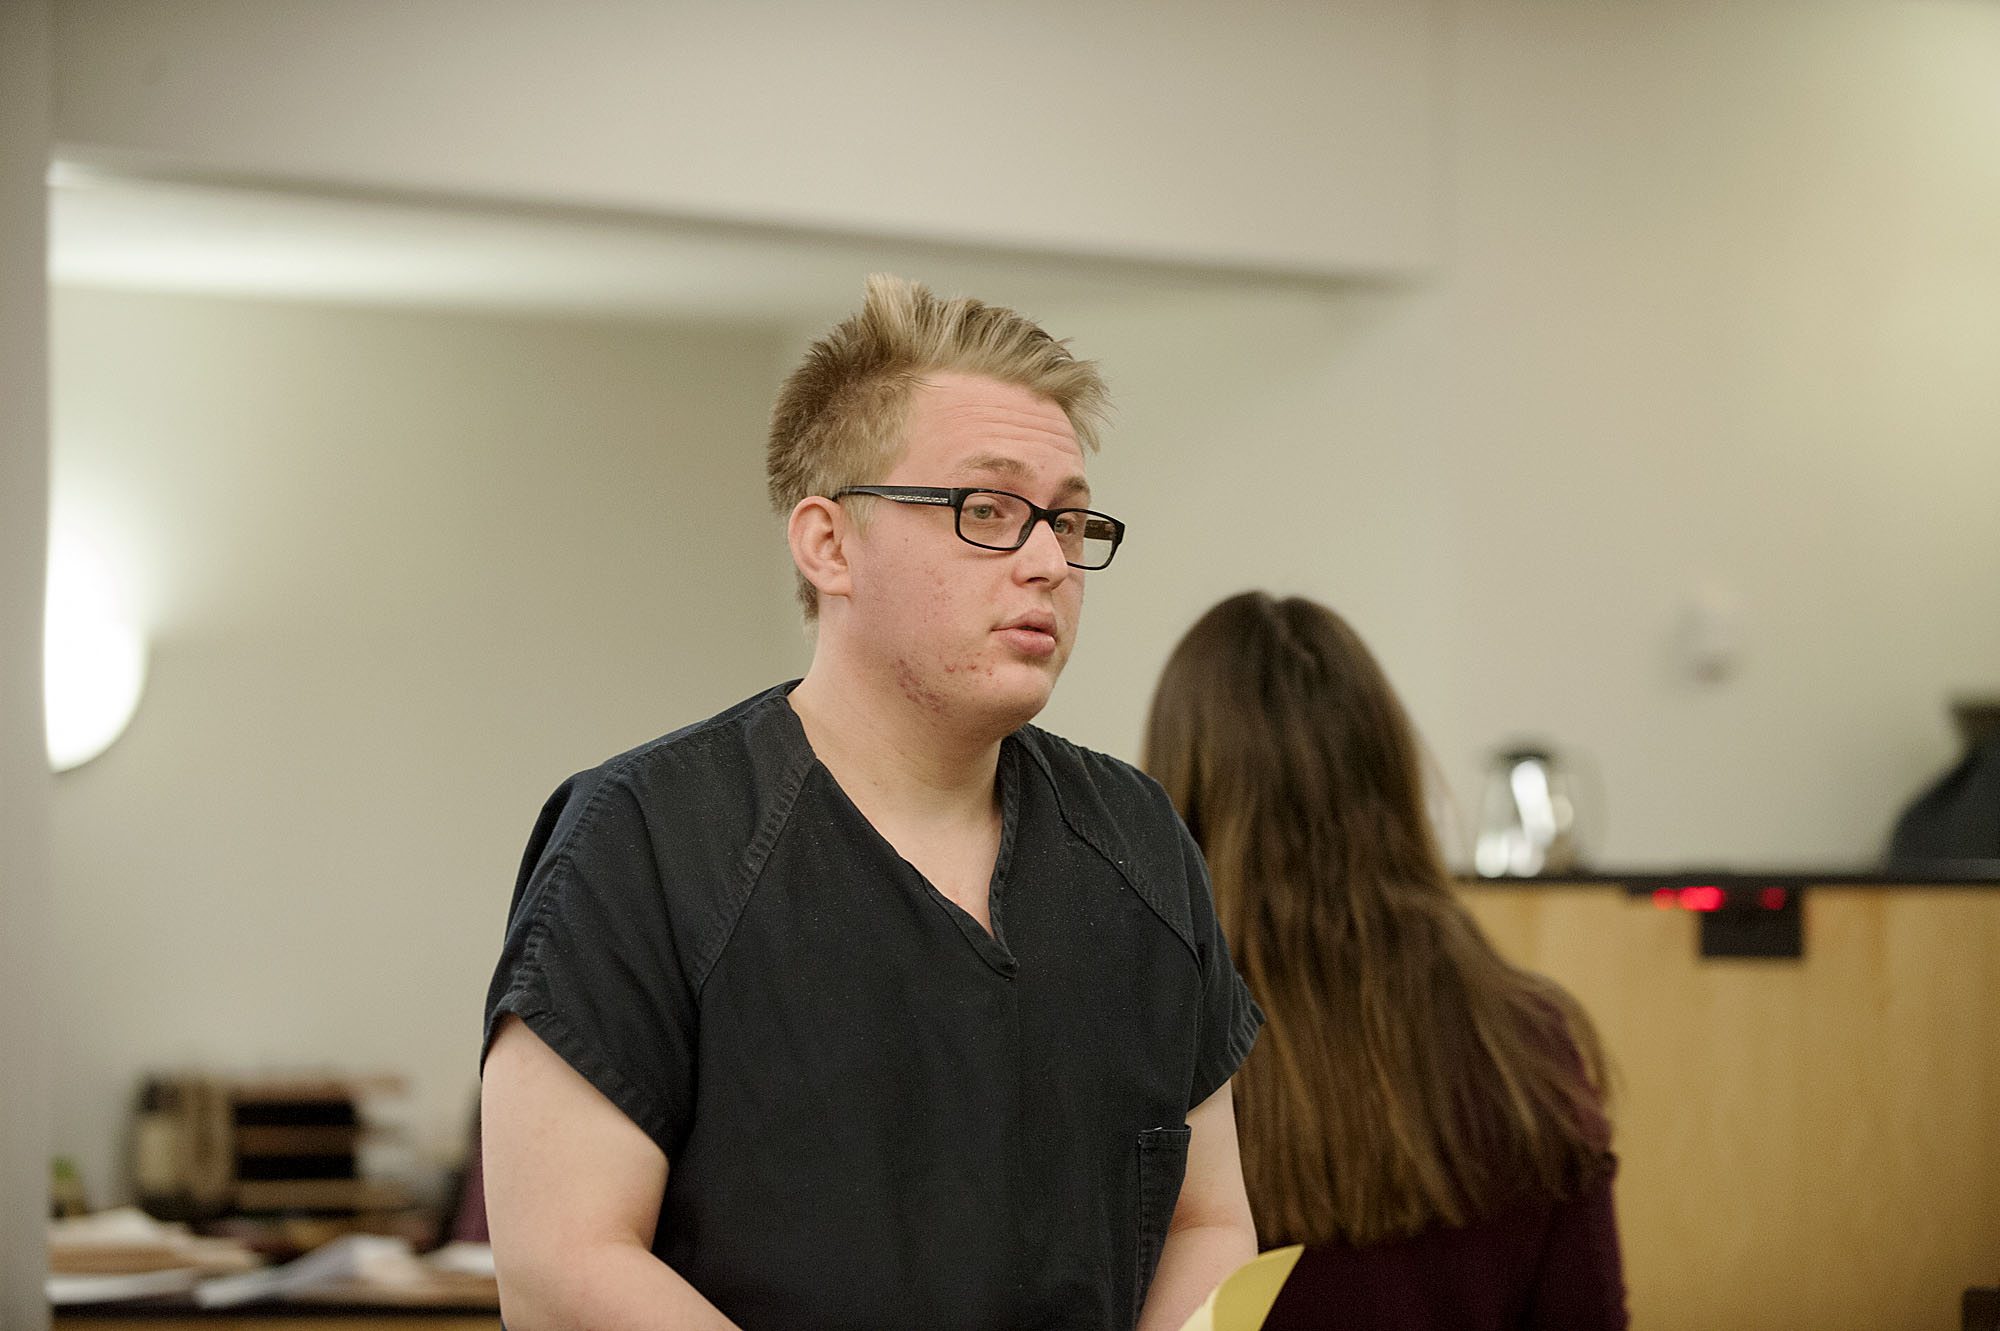 Zachary Akers, 20, of Camas makes a first appearance Jan. 6 in Clark County Superior Court in connection with a child pornography and online child exploitation case. Akers appeared Thursday in a third case to face new allegations.